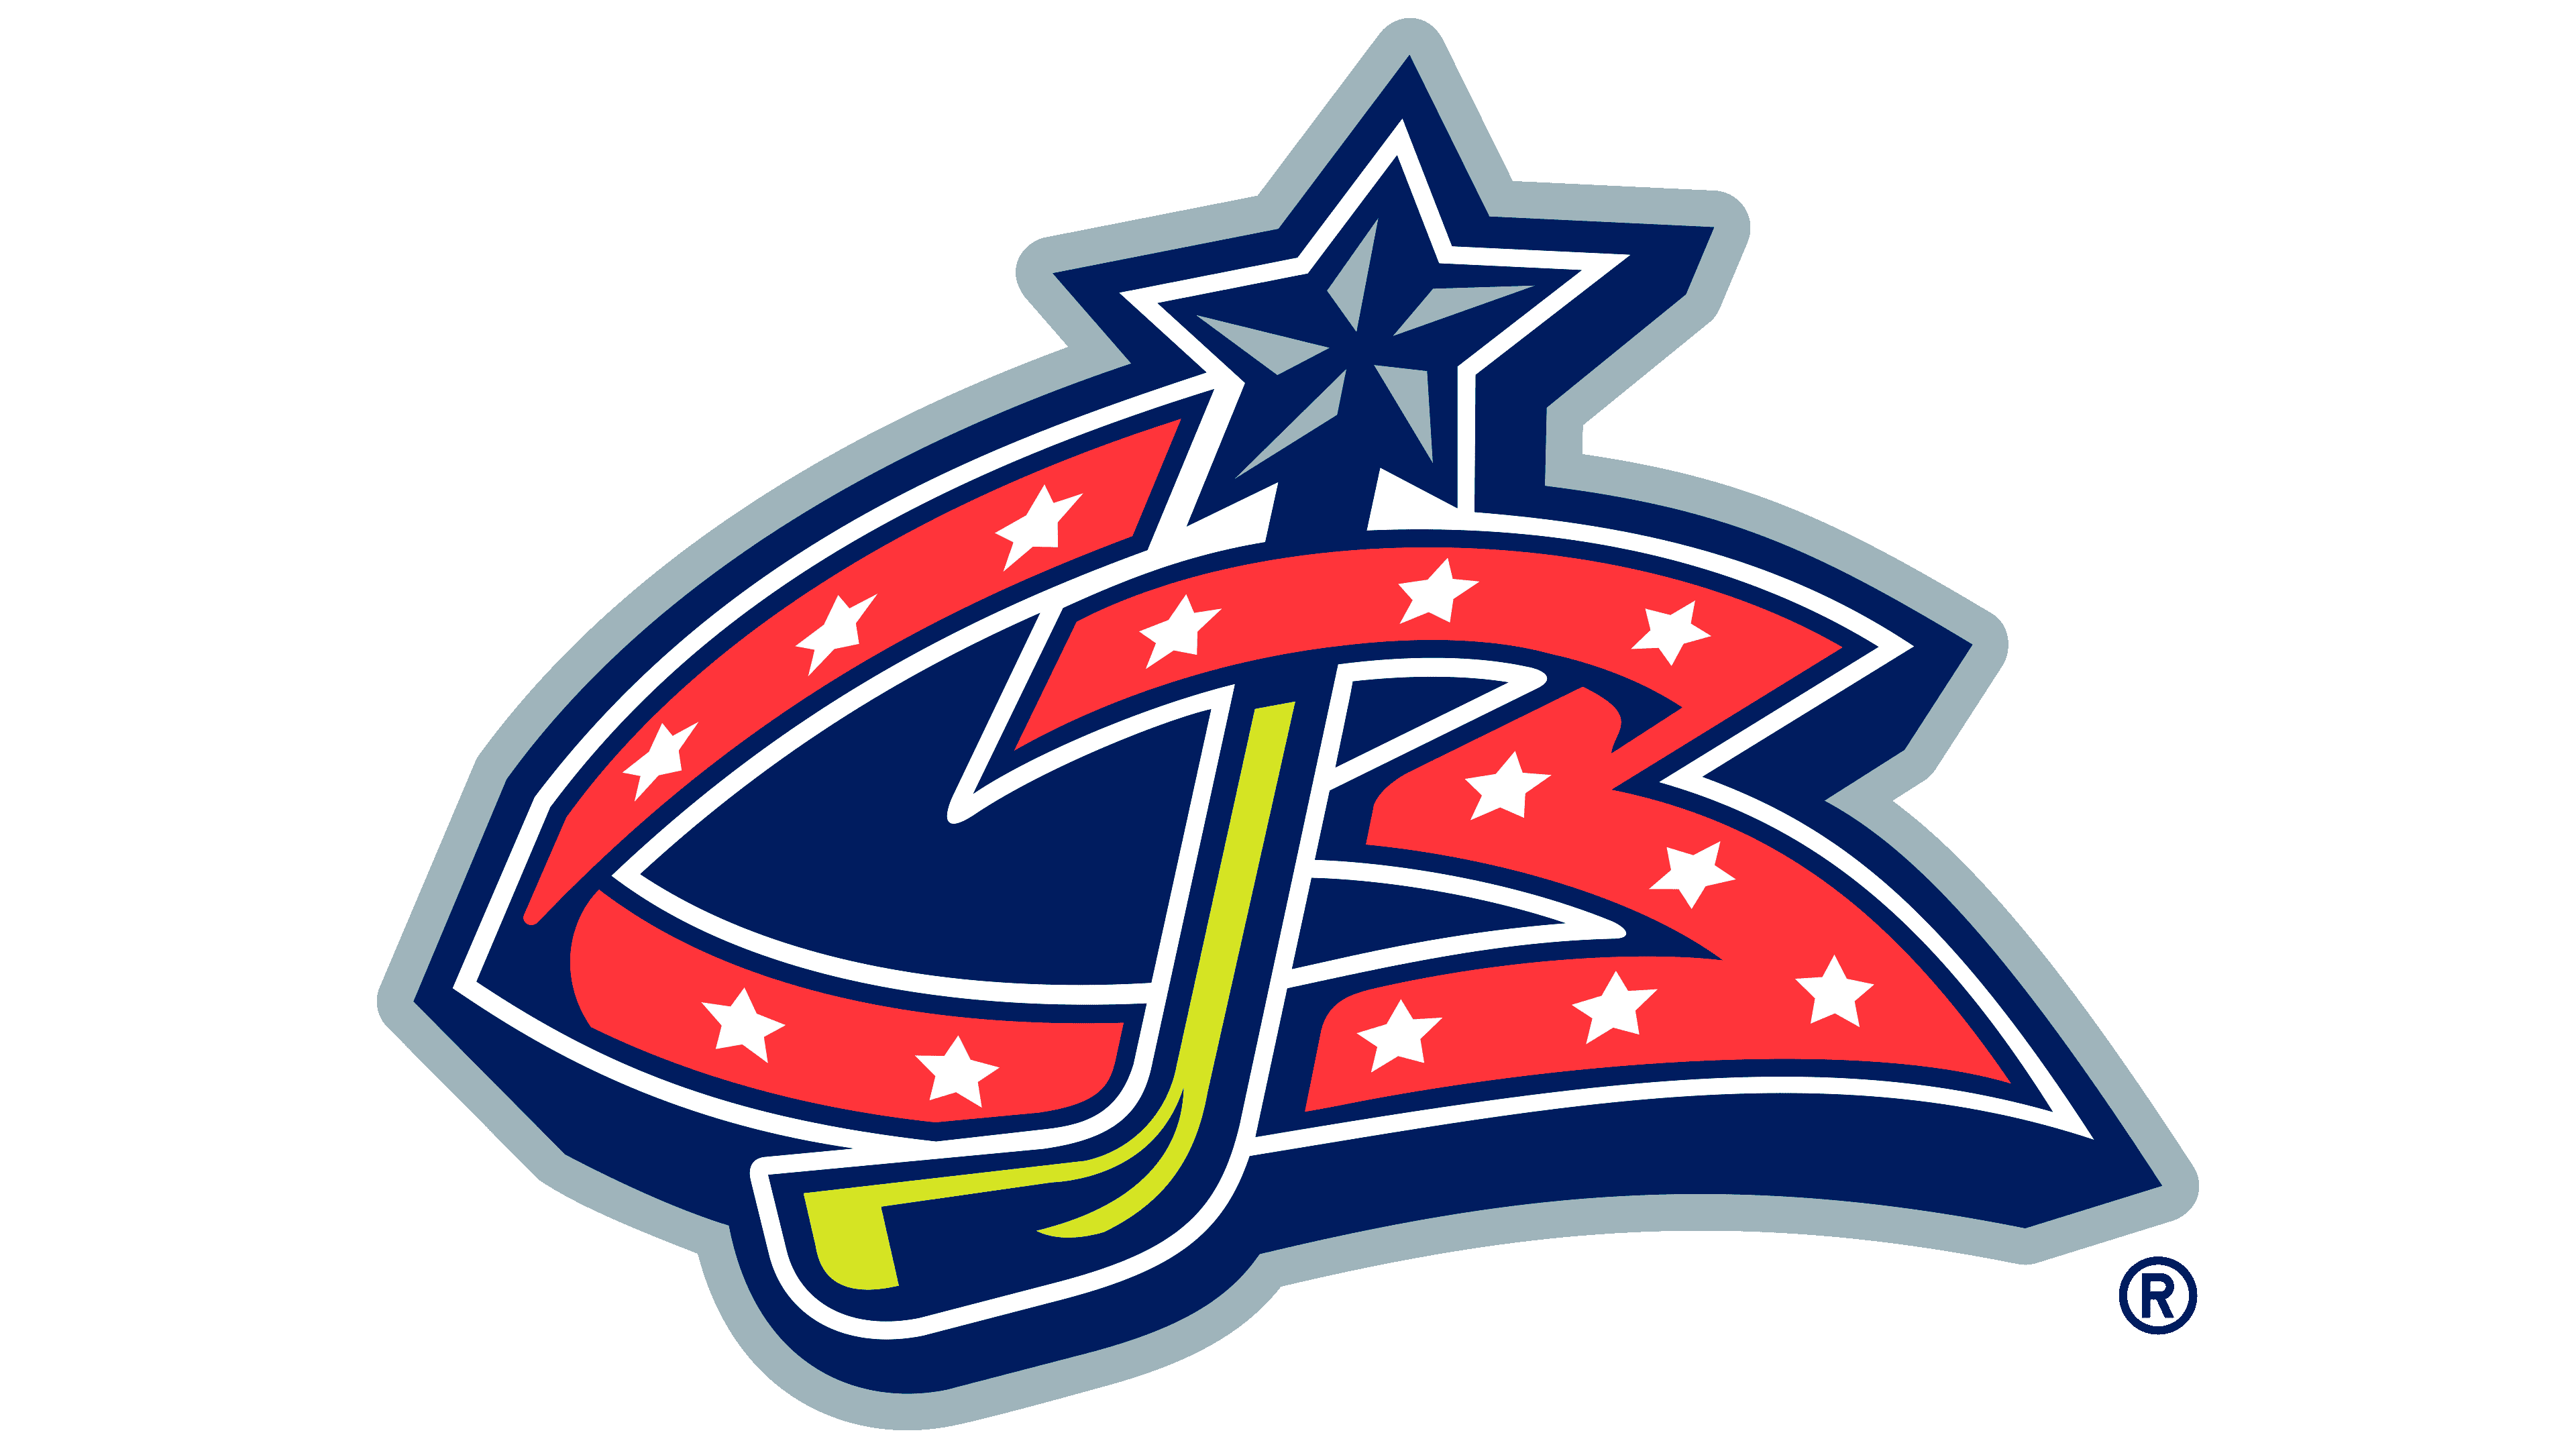 Columbus Blue Jackets Logo, meaning, history, PNG, SVG, vector